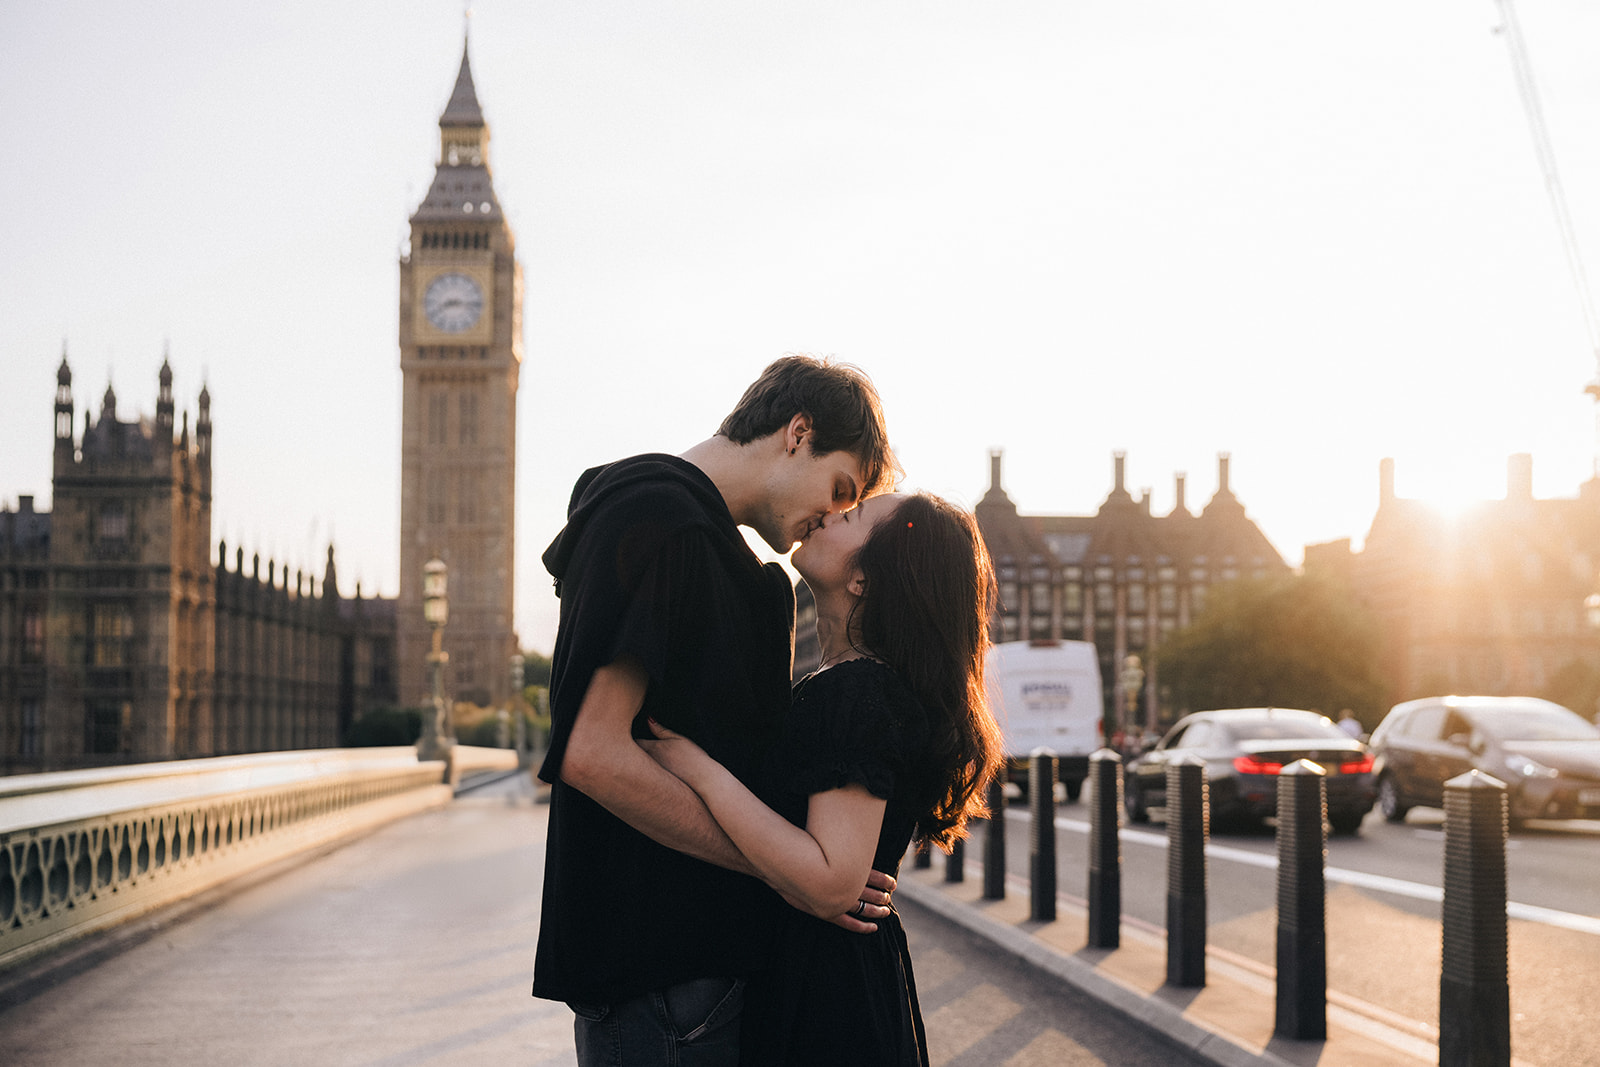 Couple kissing in the sunset with London Bigben in the background